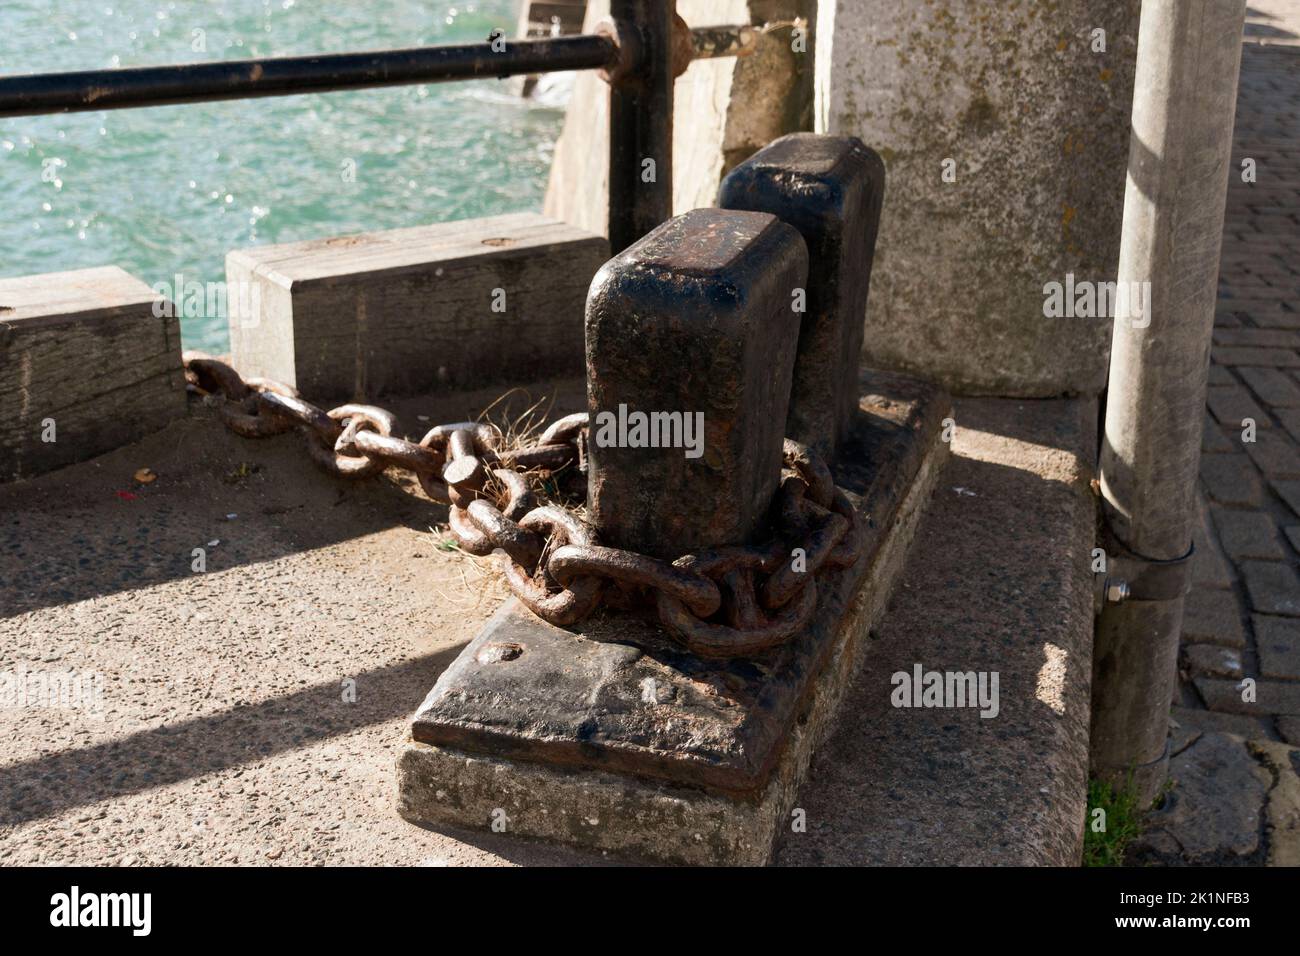 A close up view of a anchors docking station up at the side of the habour, Stock Photo